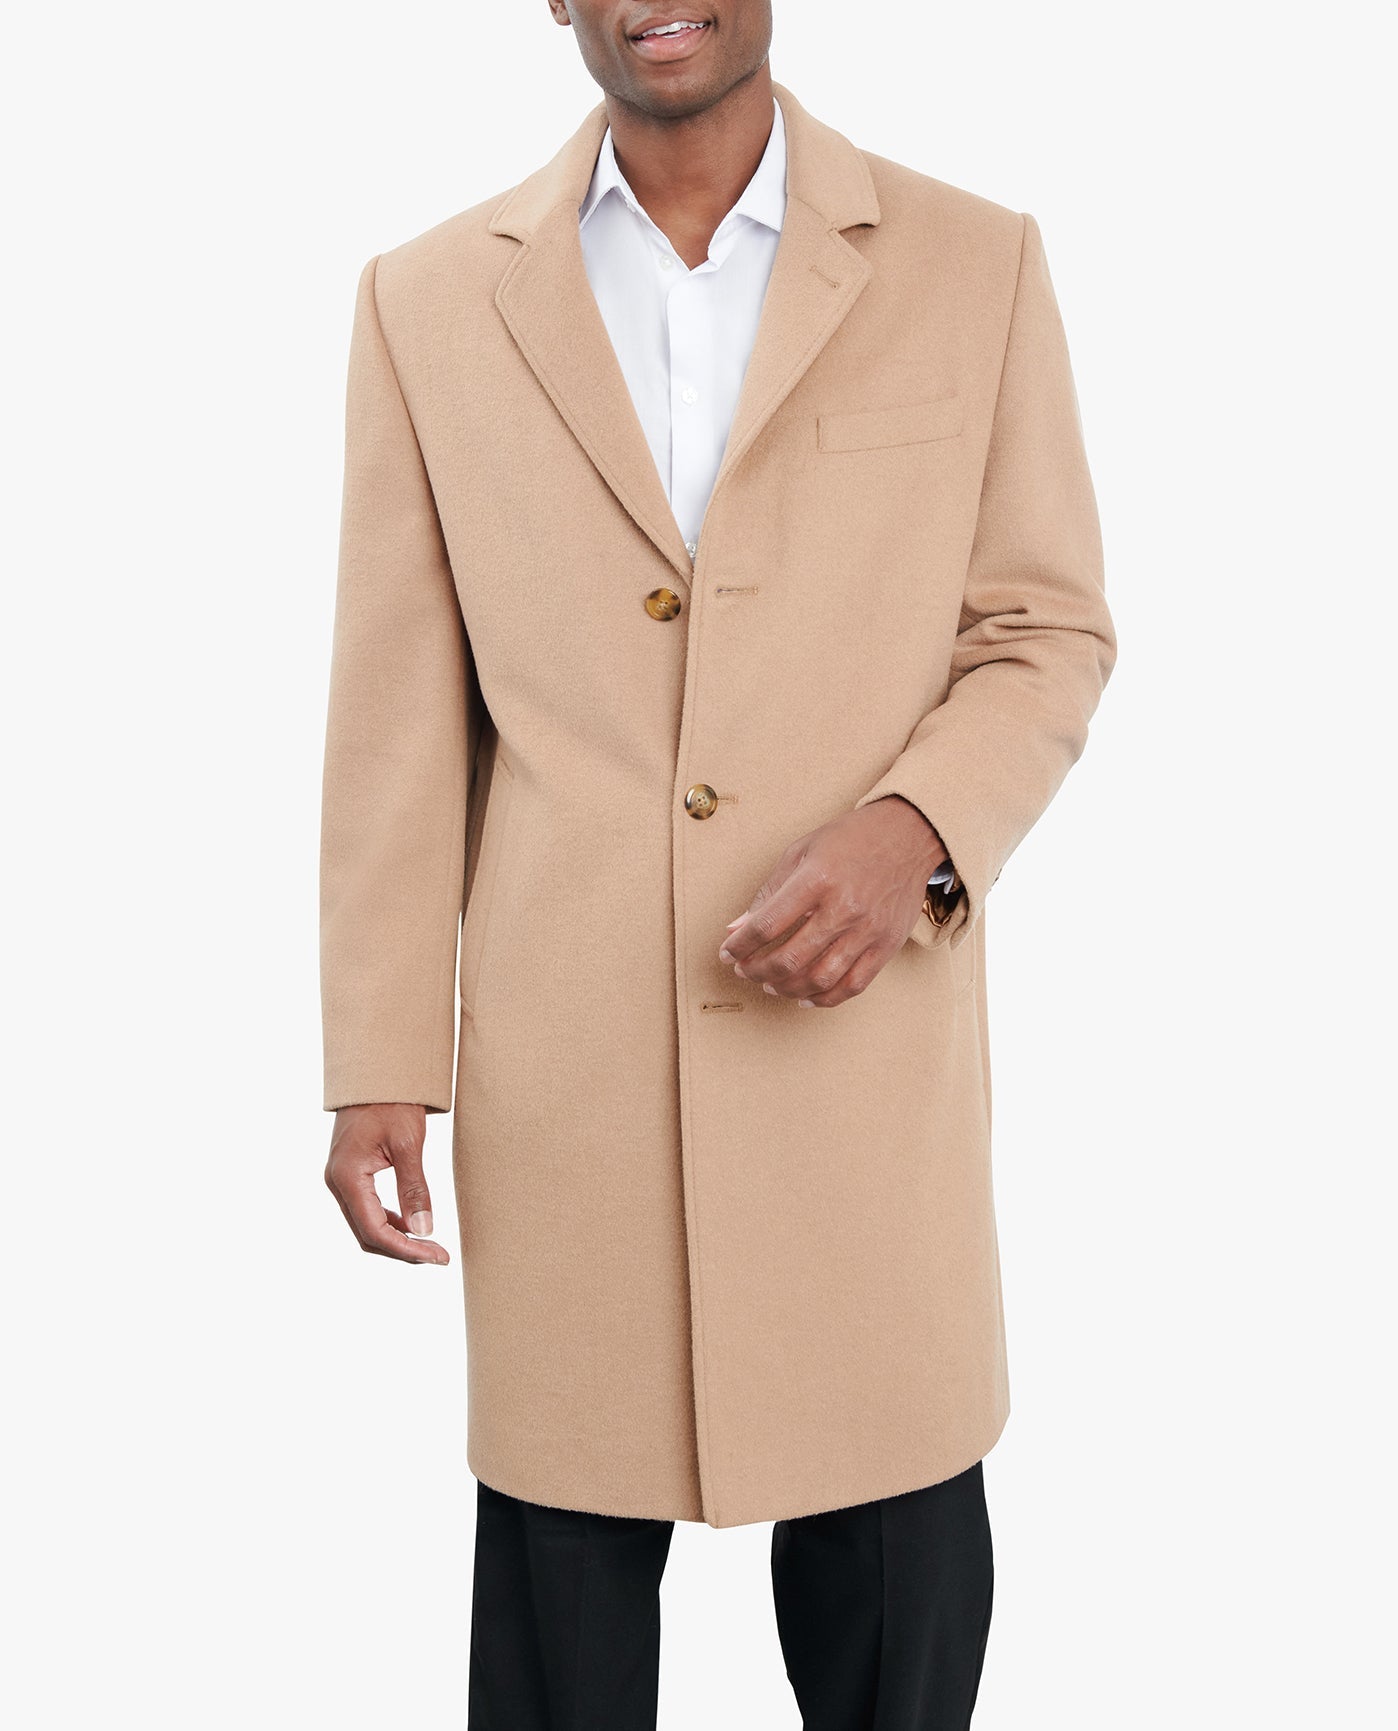 FRONT VIEW OF SIGNATURE 42" SINGLE BREASTED WOOL JACKET | CAMEL